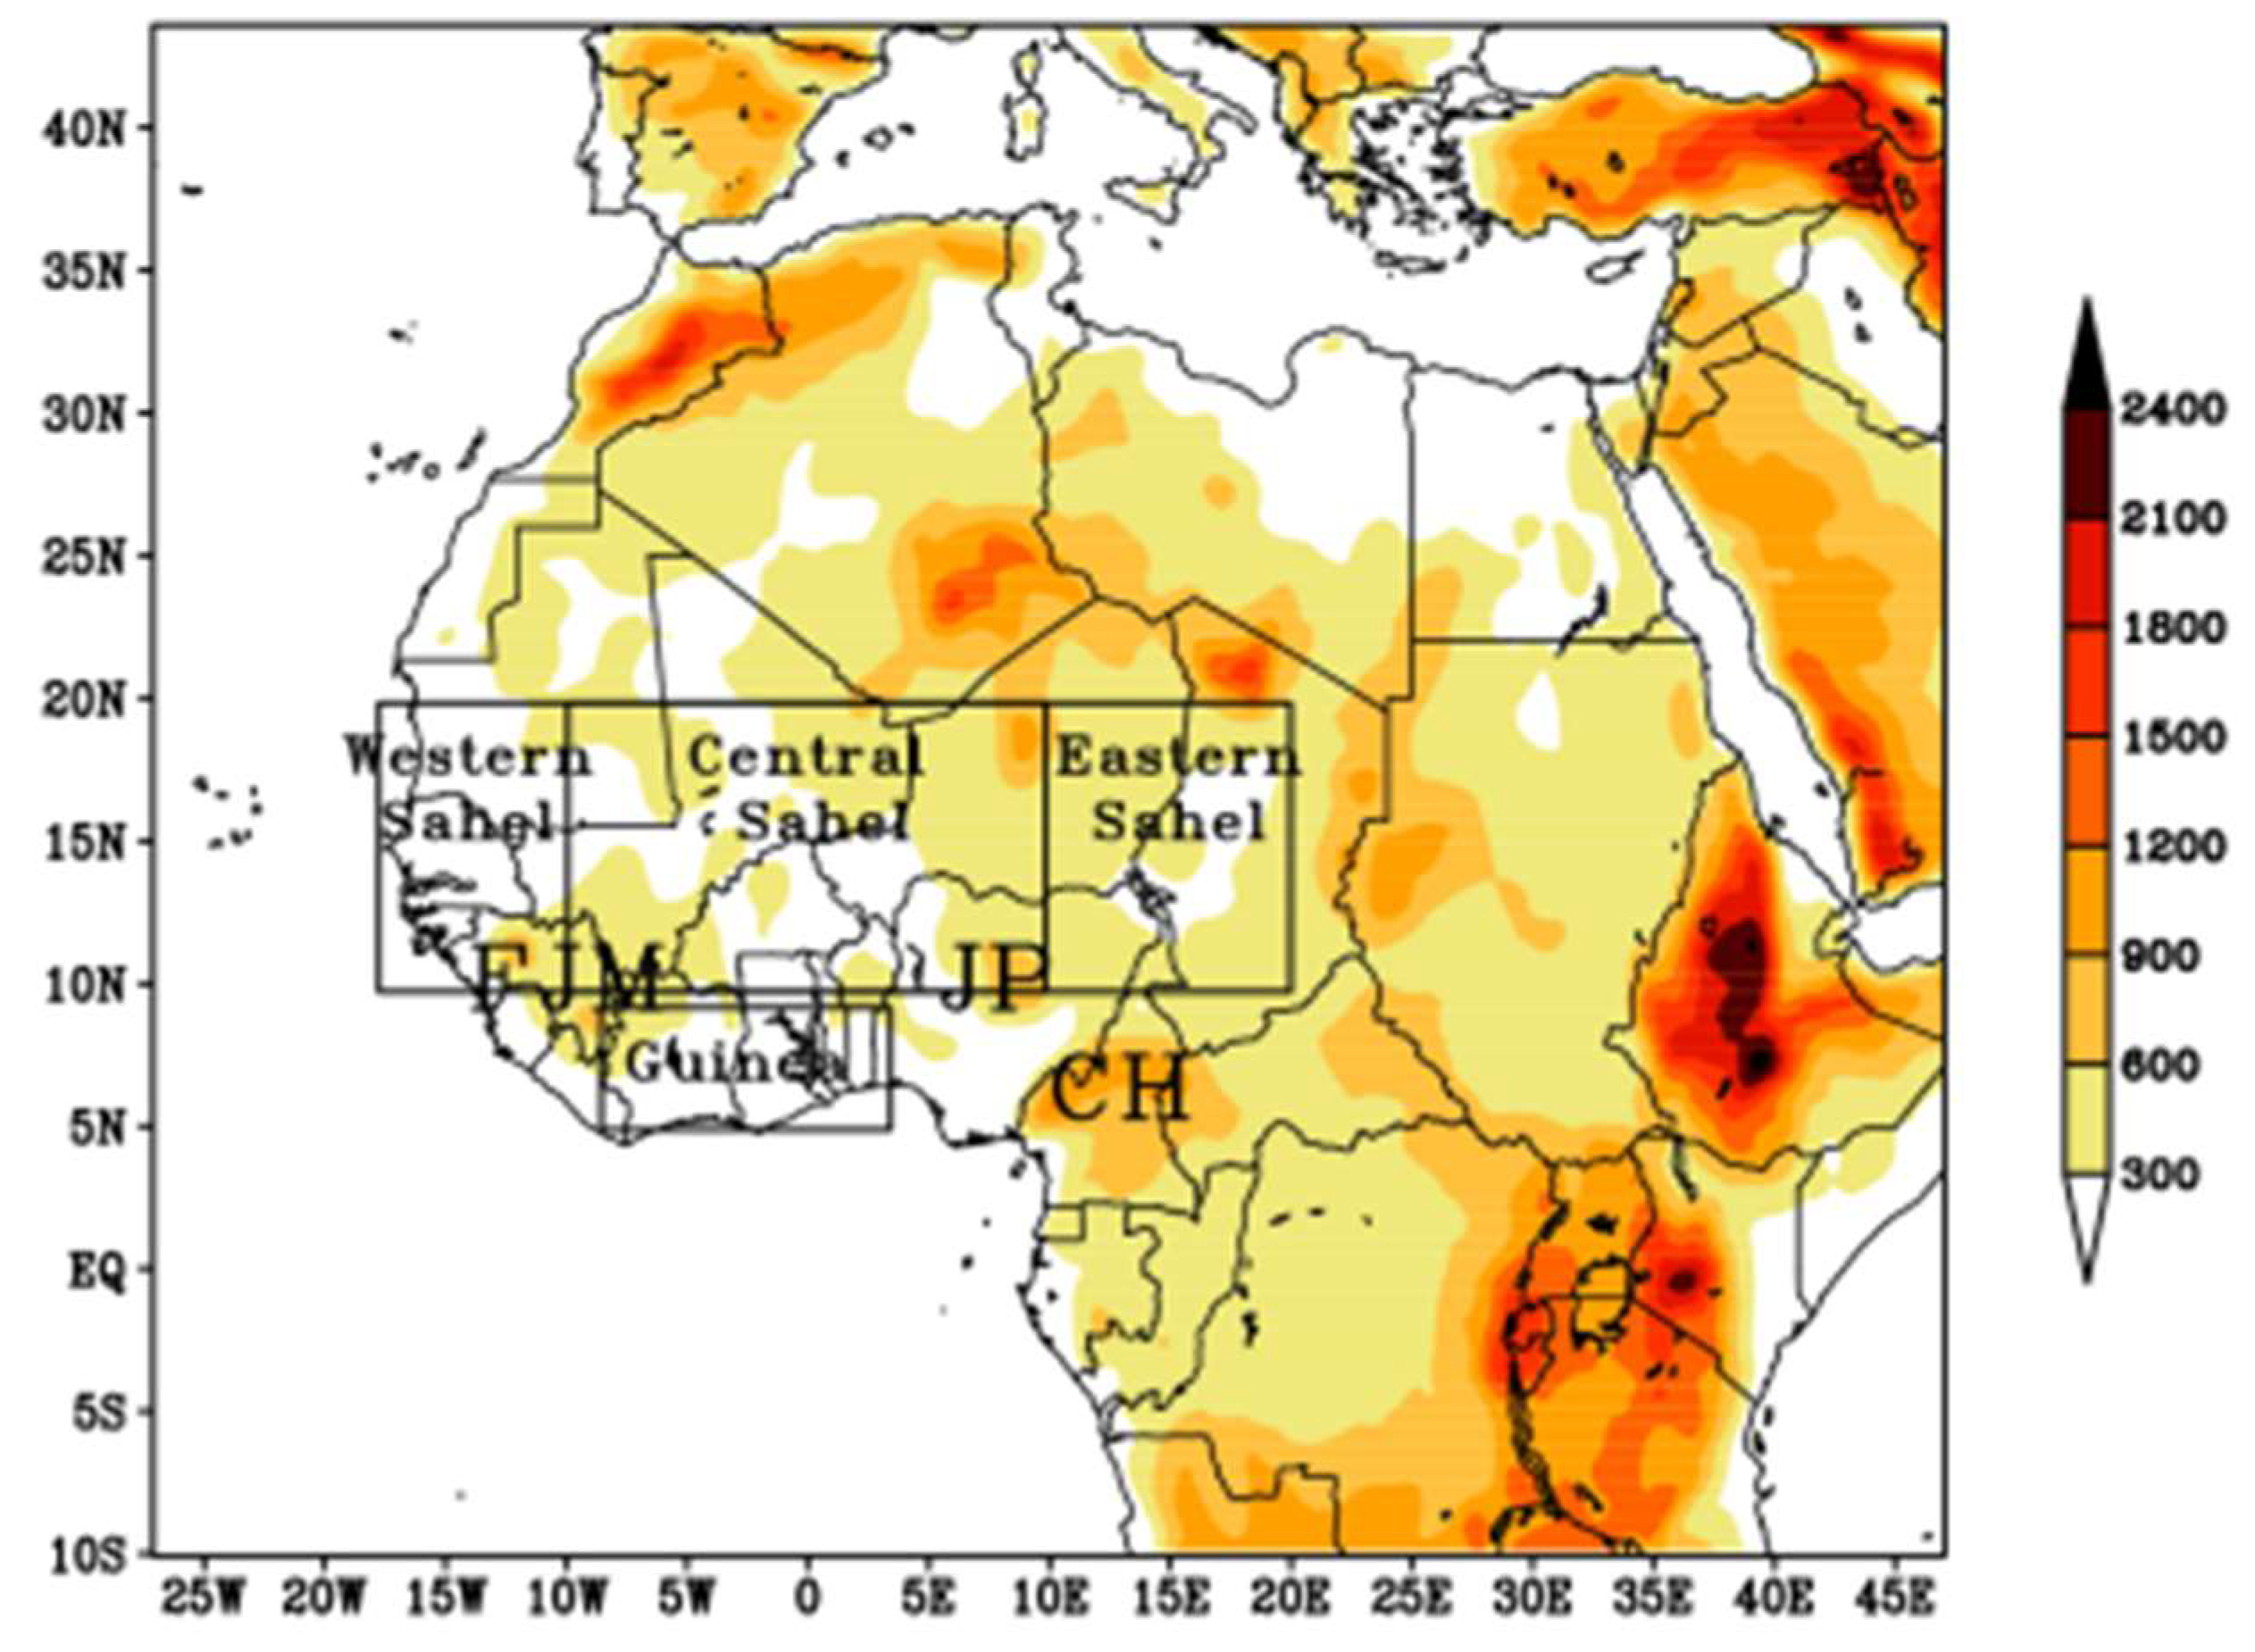 climate temperature map of africa